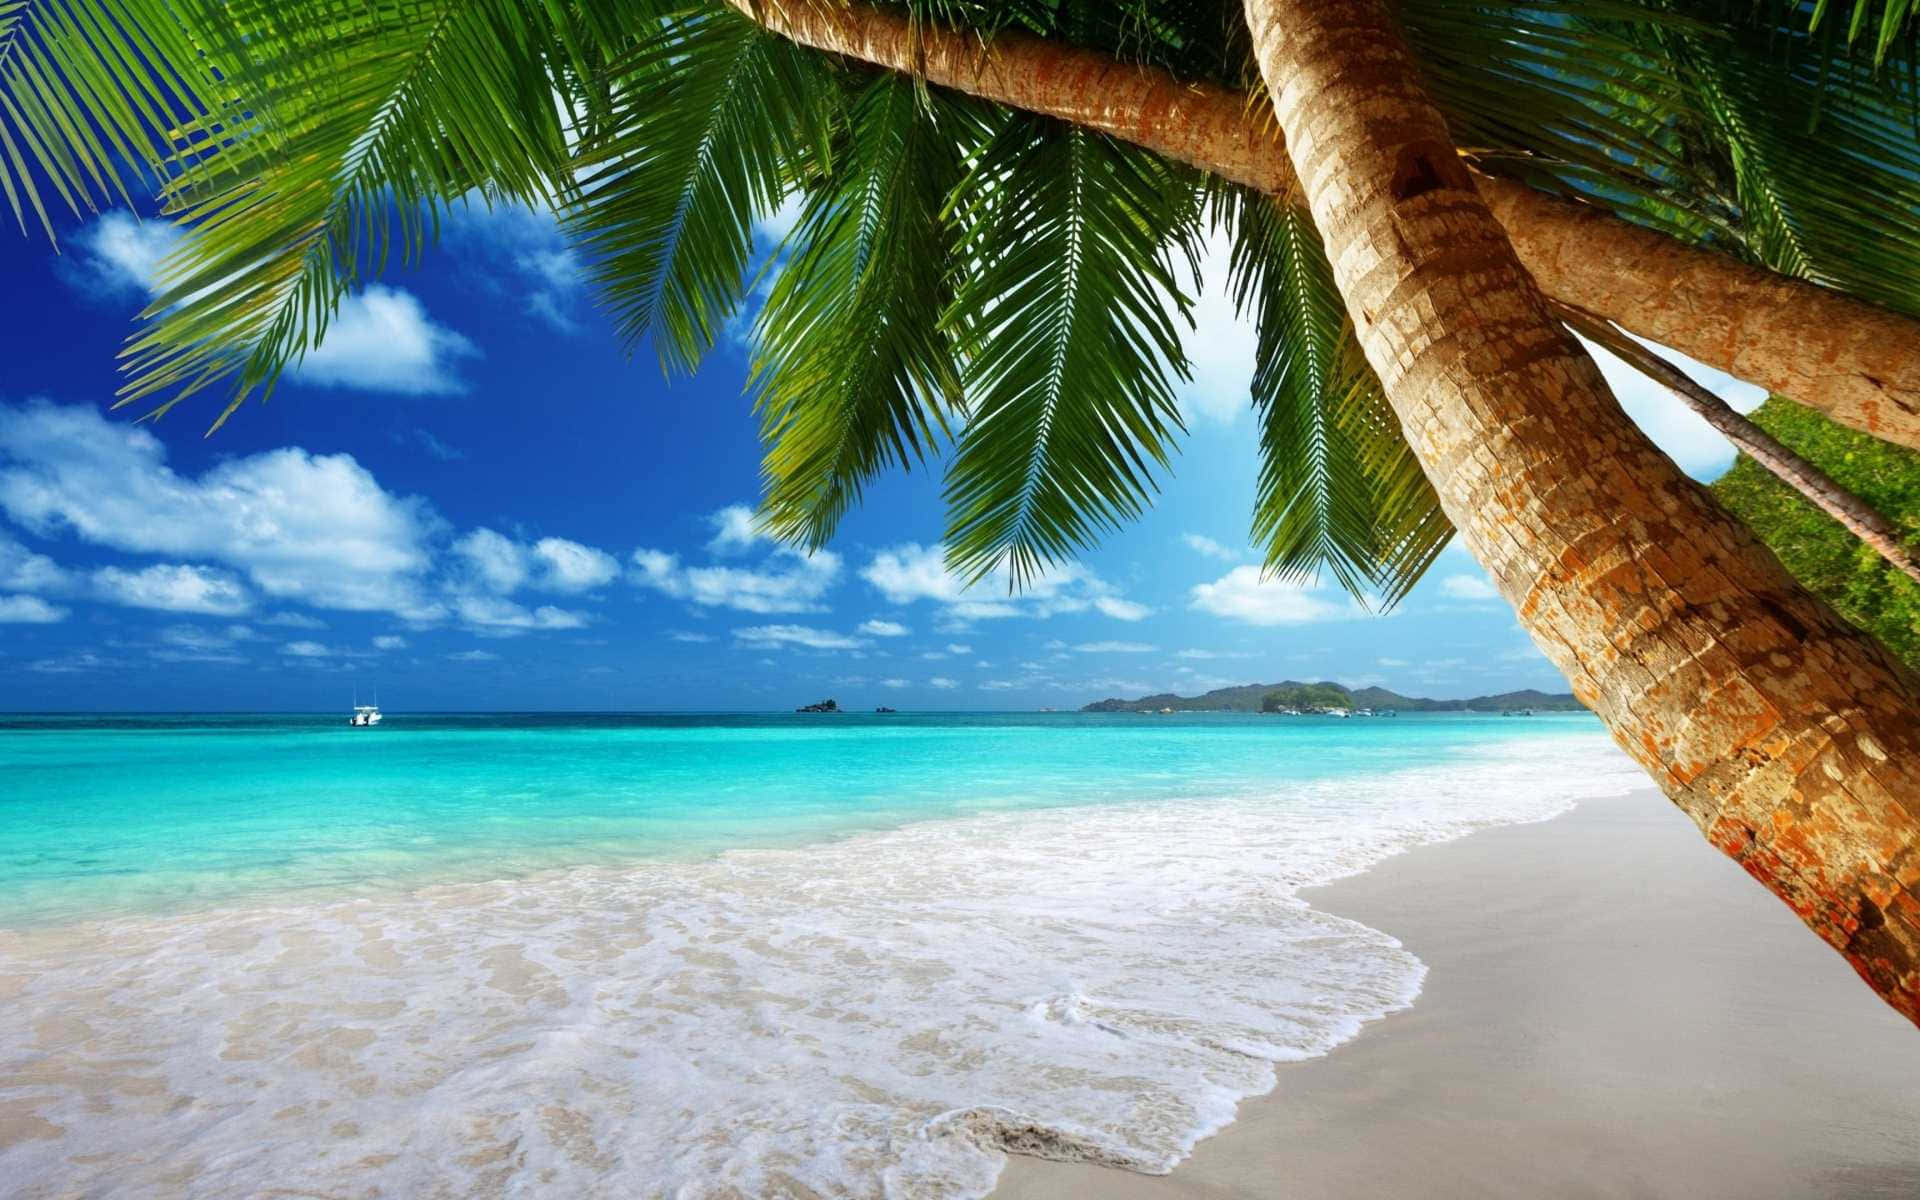 A Beach With Palm Trees And Blue Water